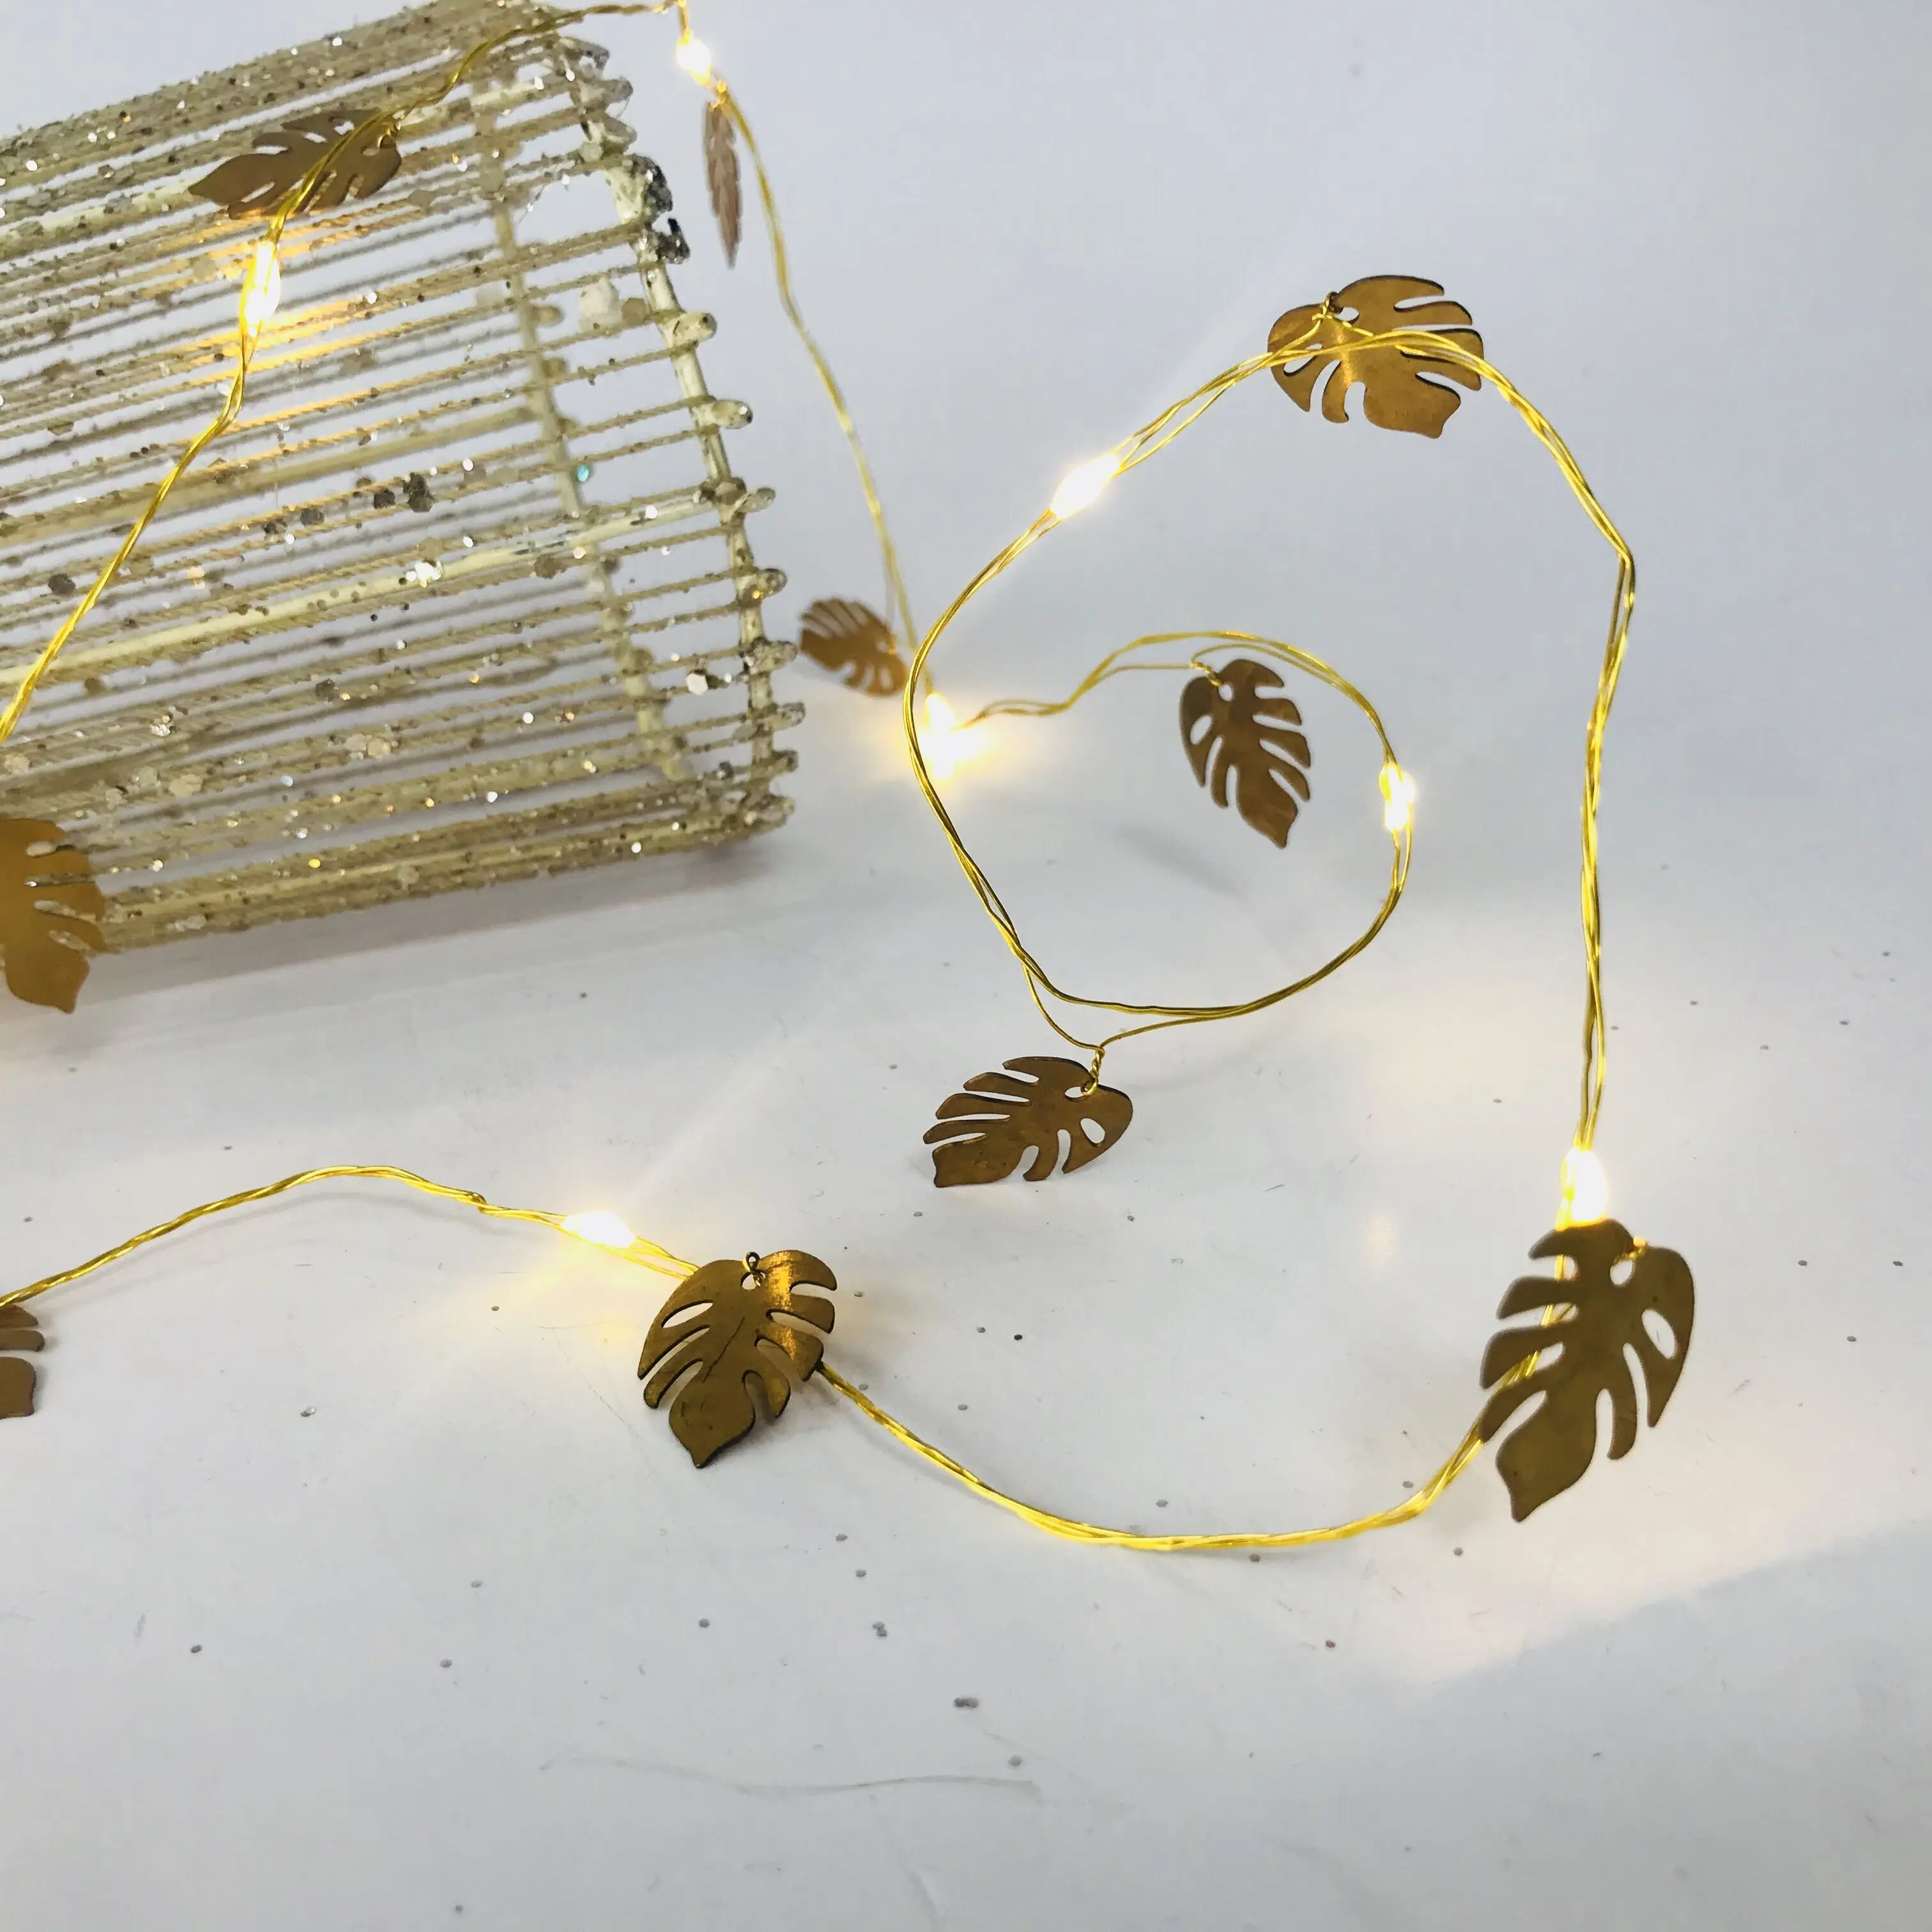 18LT Gold Metal Palm Tree Leaf  Lights Battery Operated LED Copper Wire String Lights Warm White Tiny Leaf Garland For Garden